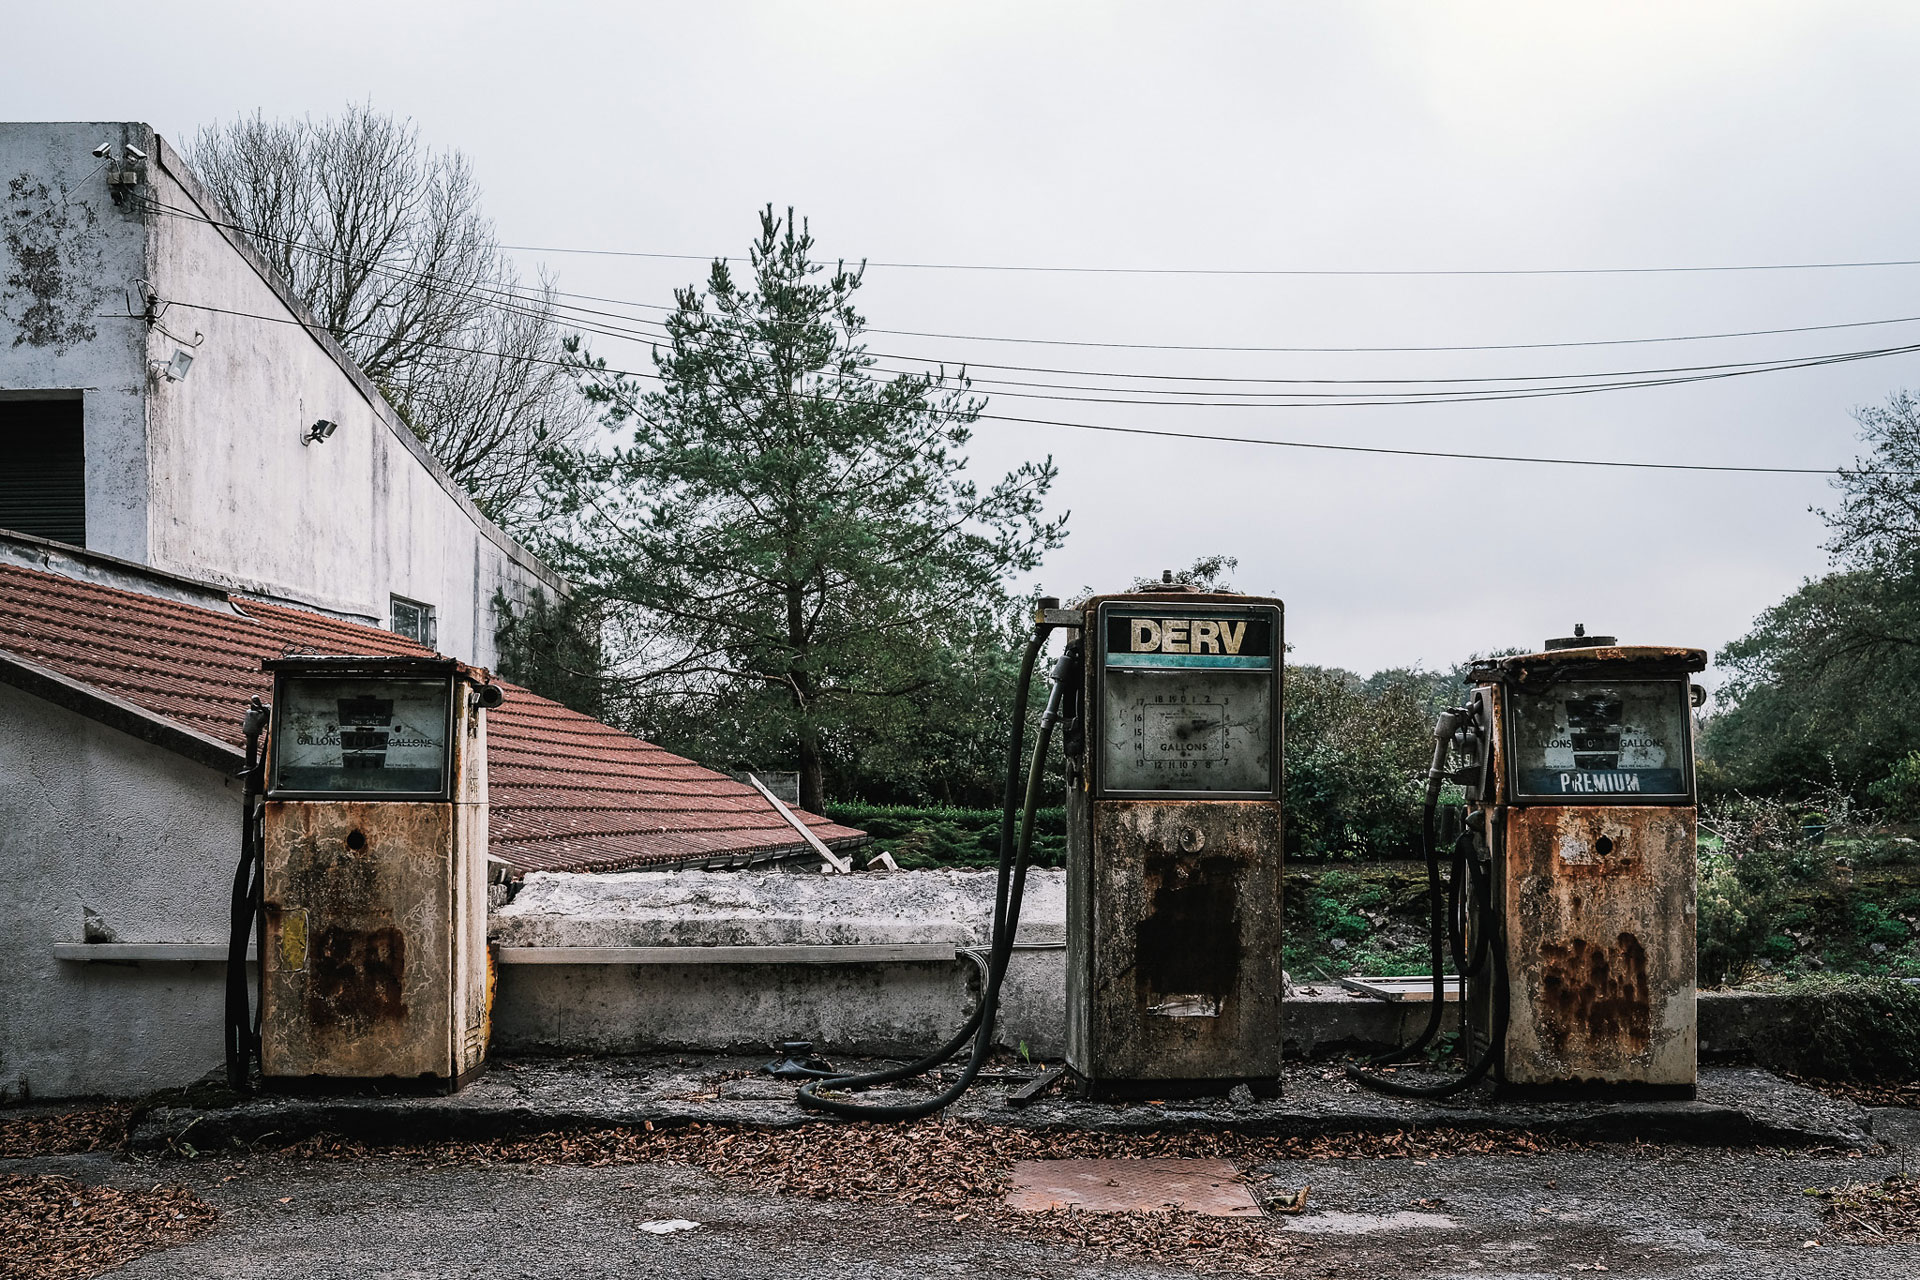 Along The Way Photographic Documentary Abandoned Fuel Petrol pumps on the Mendips